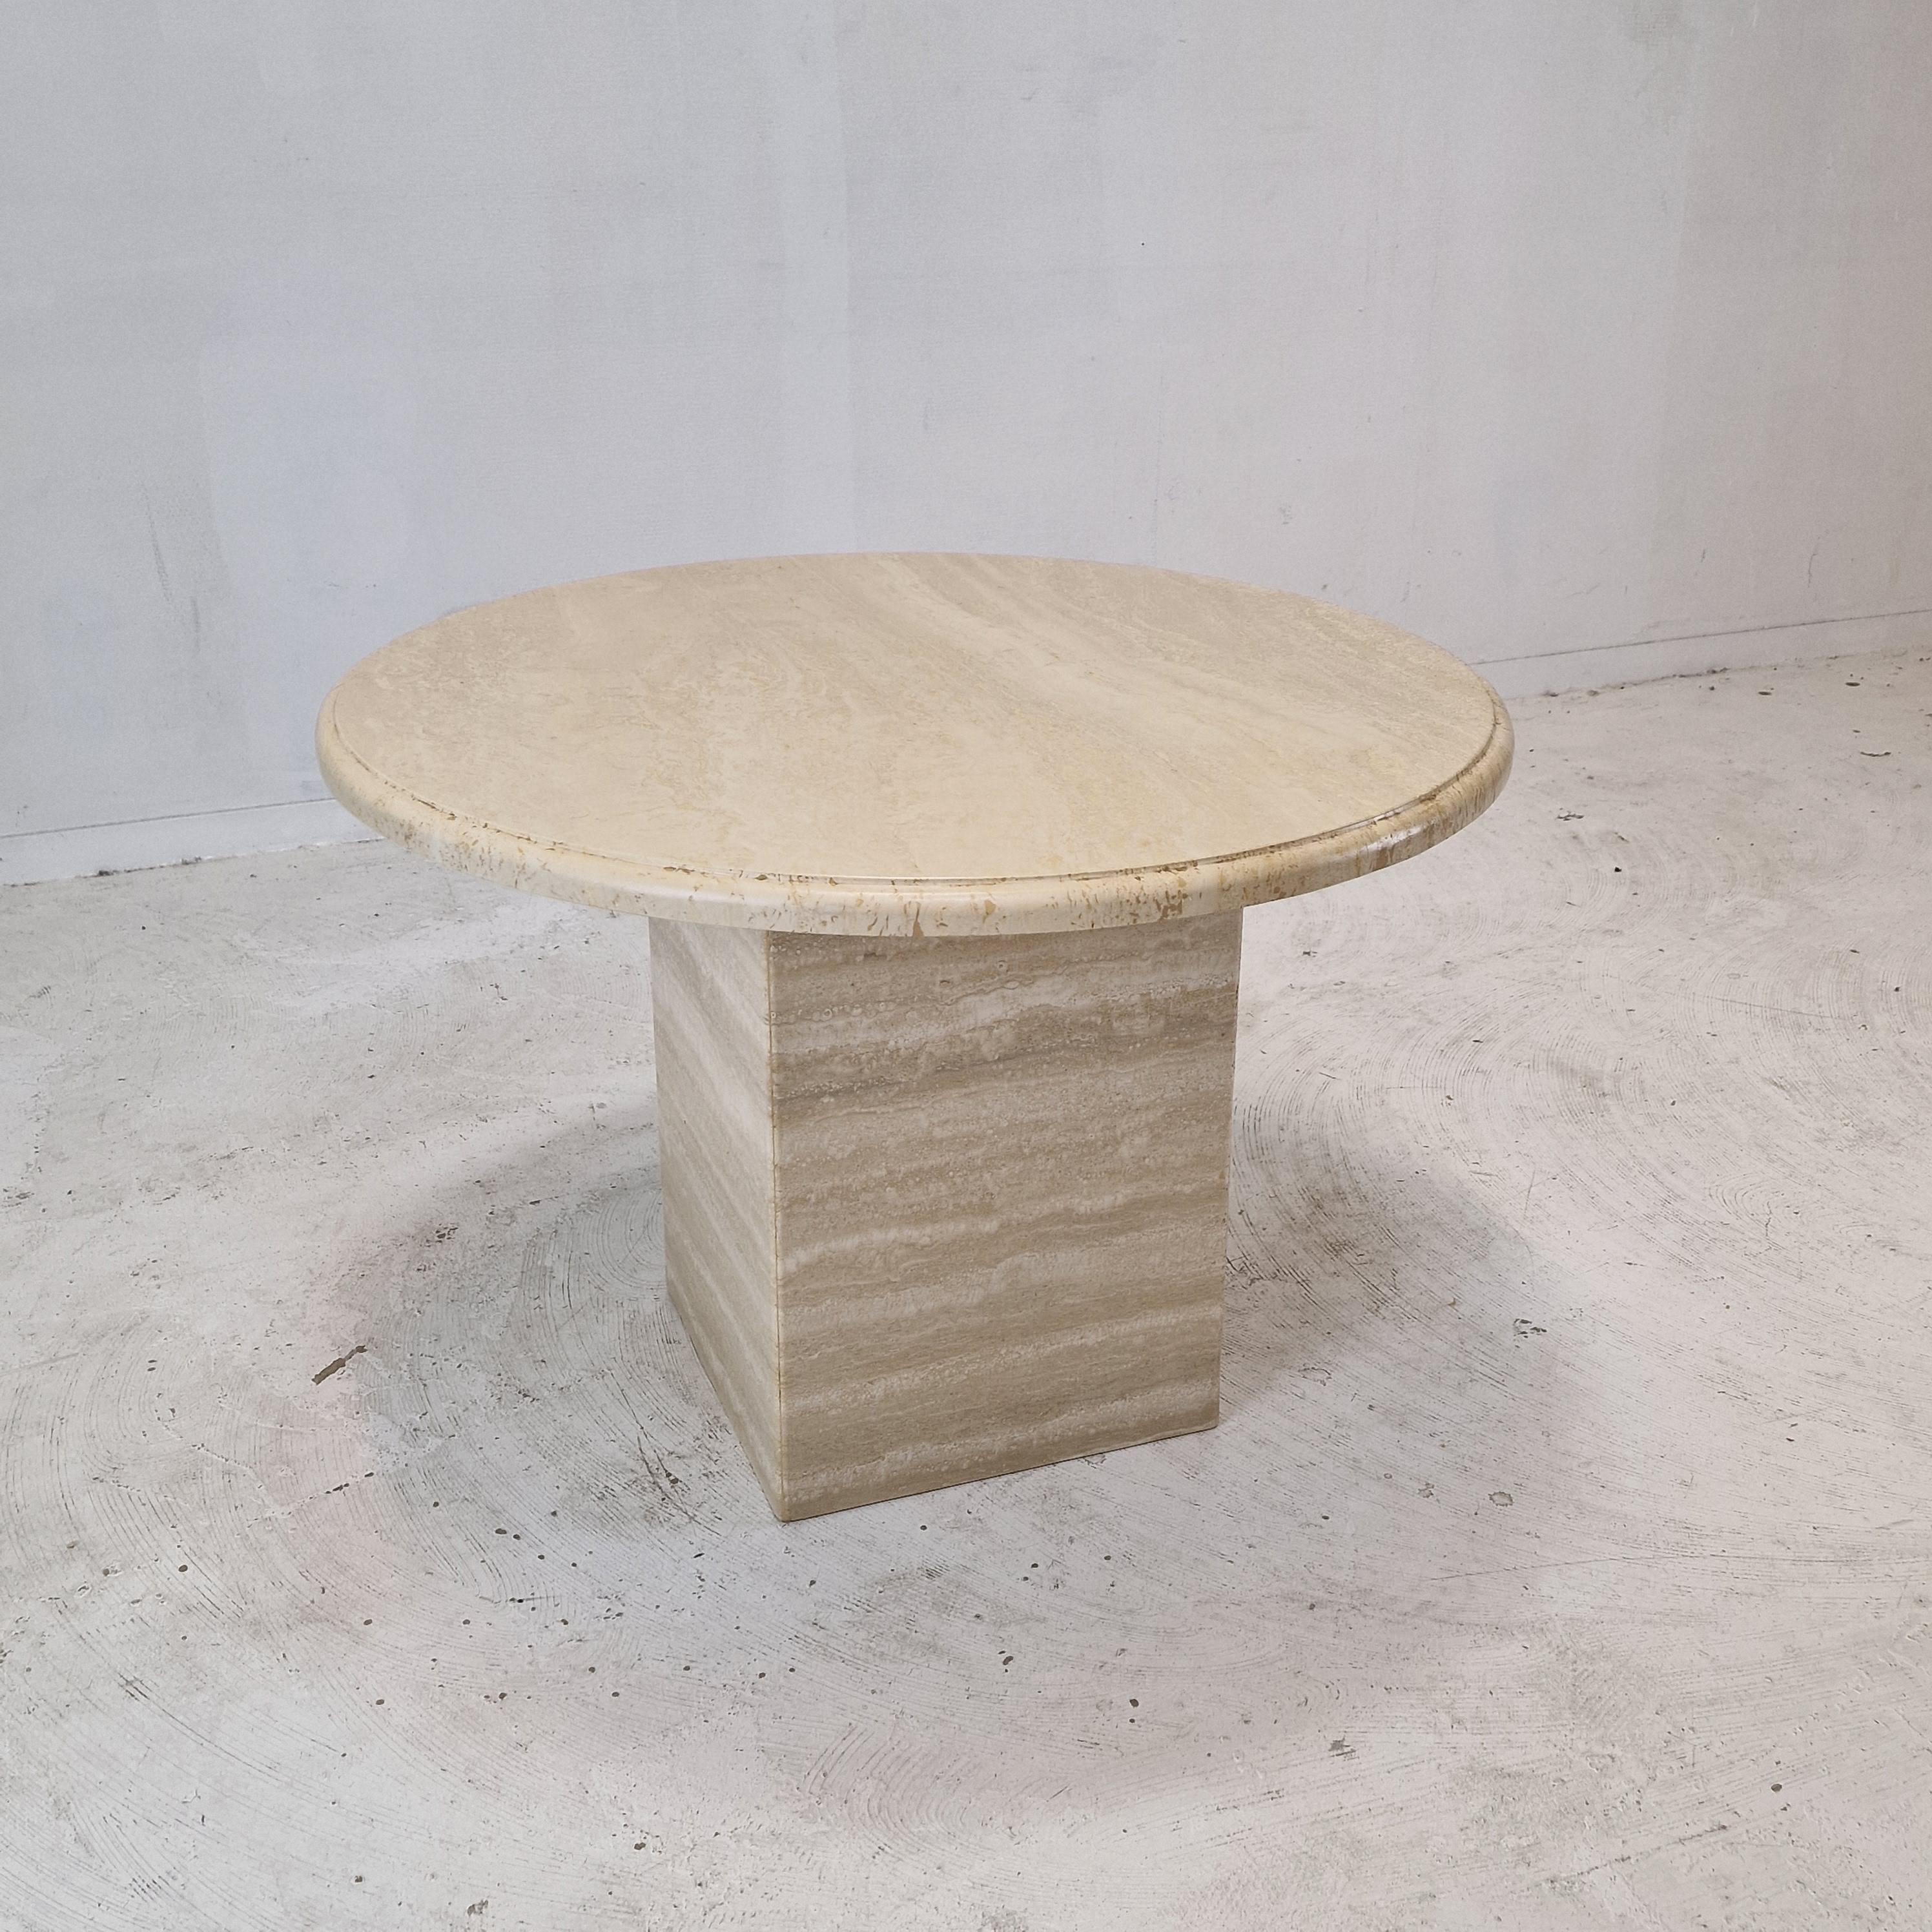 Hand-Crafted Italian Round Coffee or Side Table in Travertine, 1980s For Sale